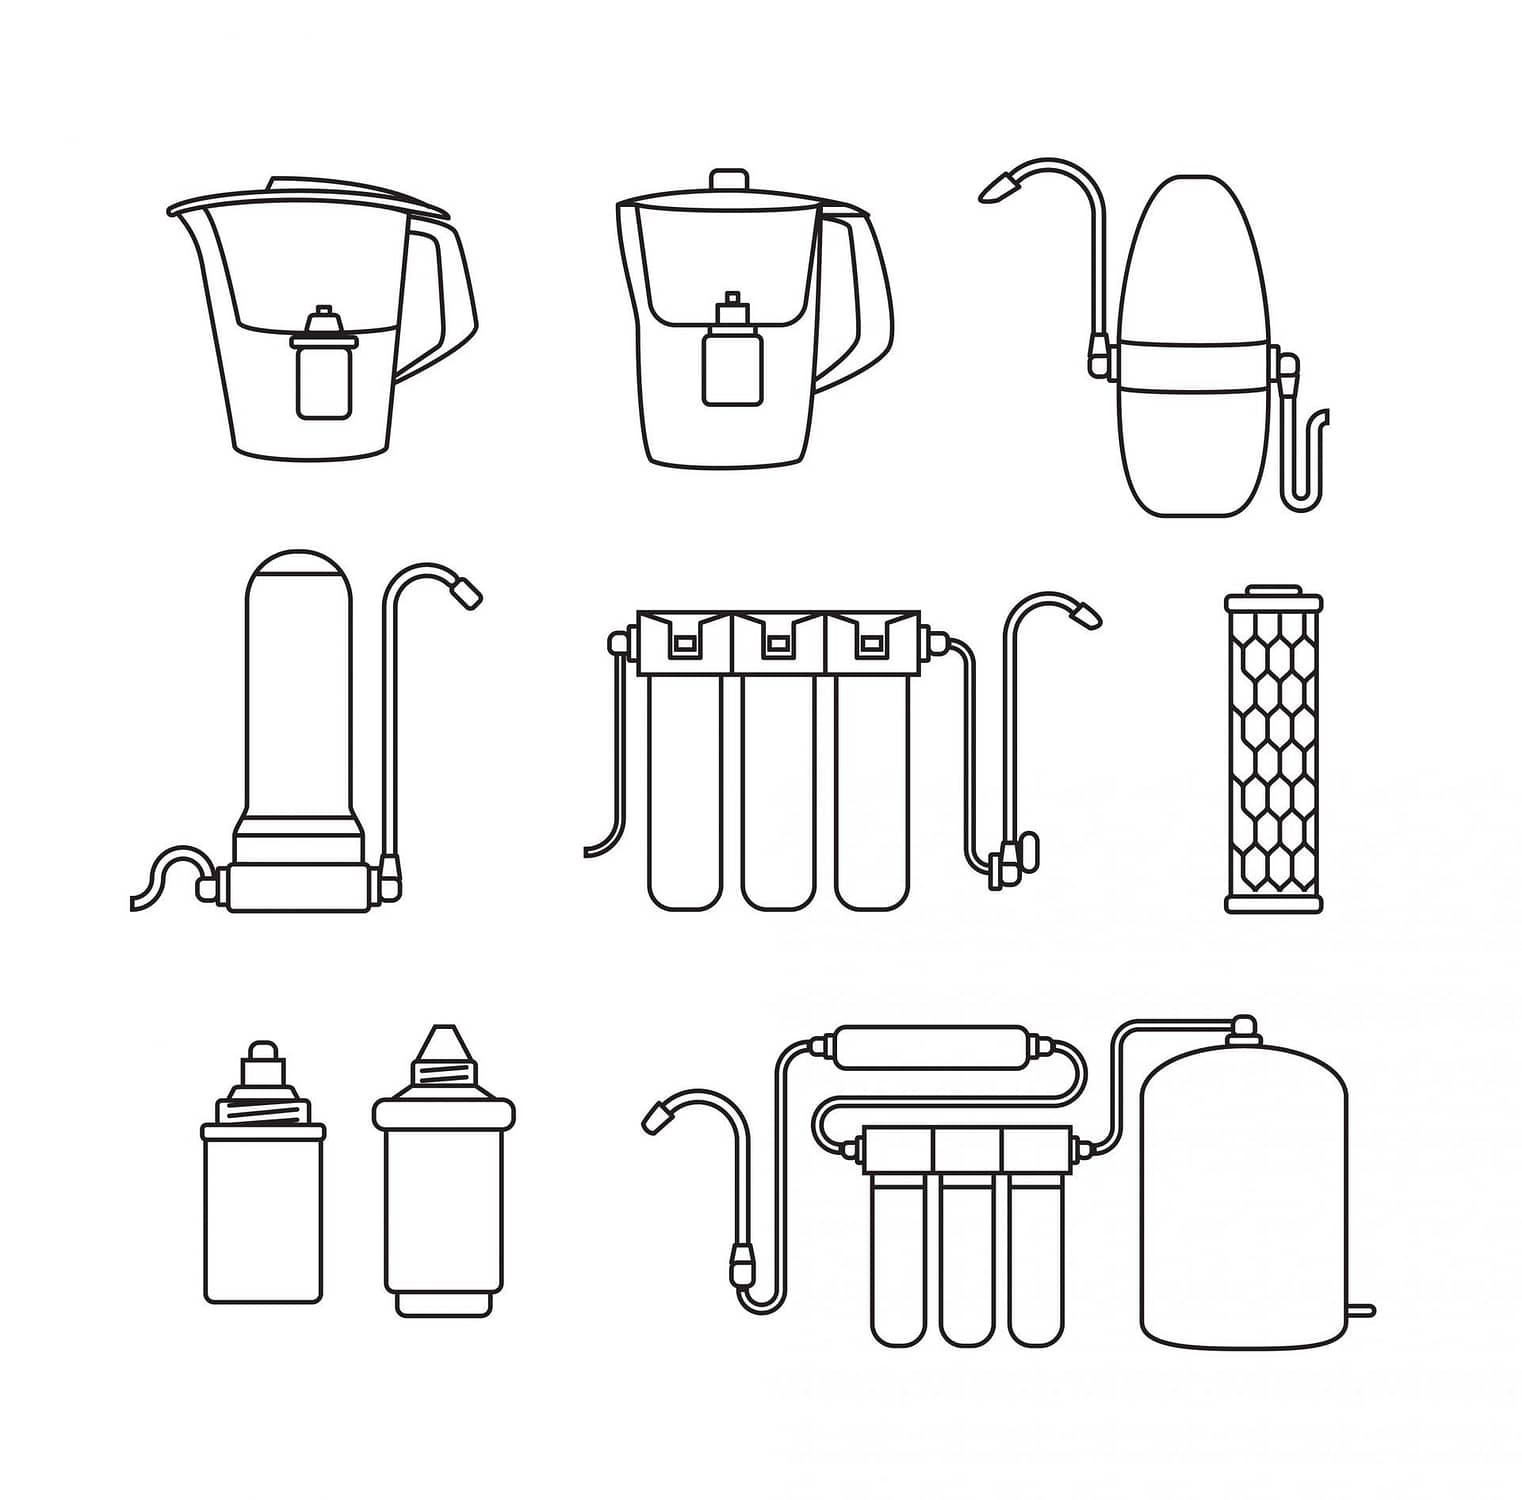 Vector image of various water filters